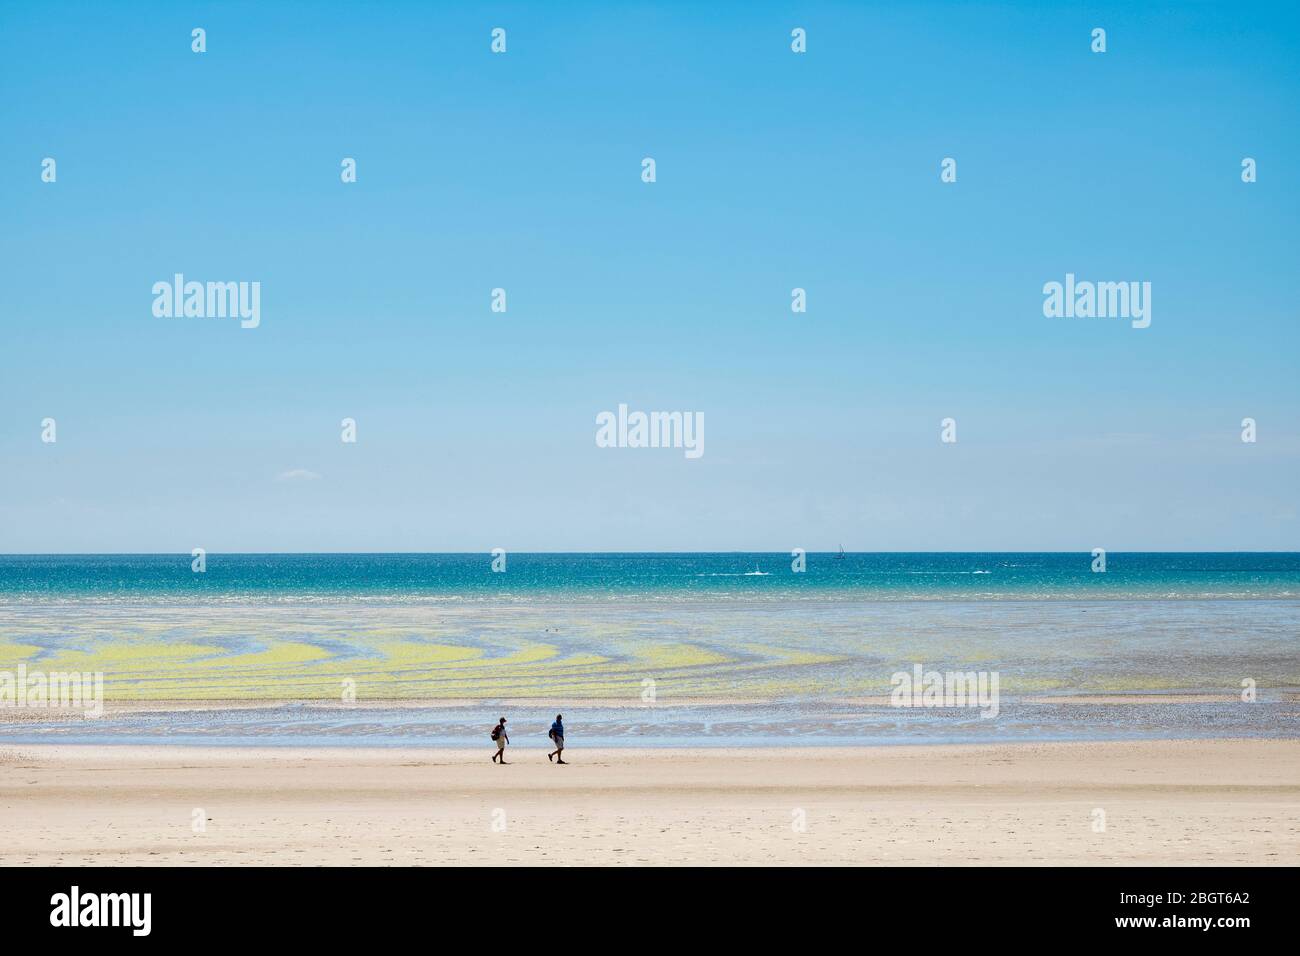 Walkers and seaweed forming geometric shapes on sandy beach with cerulean sky at St Aubin's Bay, Jersey, Channel Isles Stock Photo